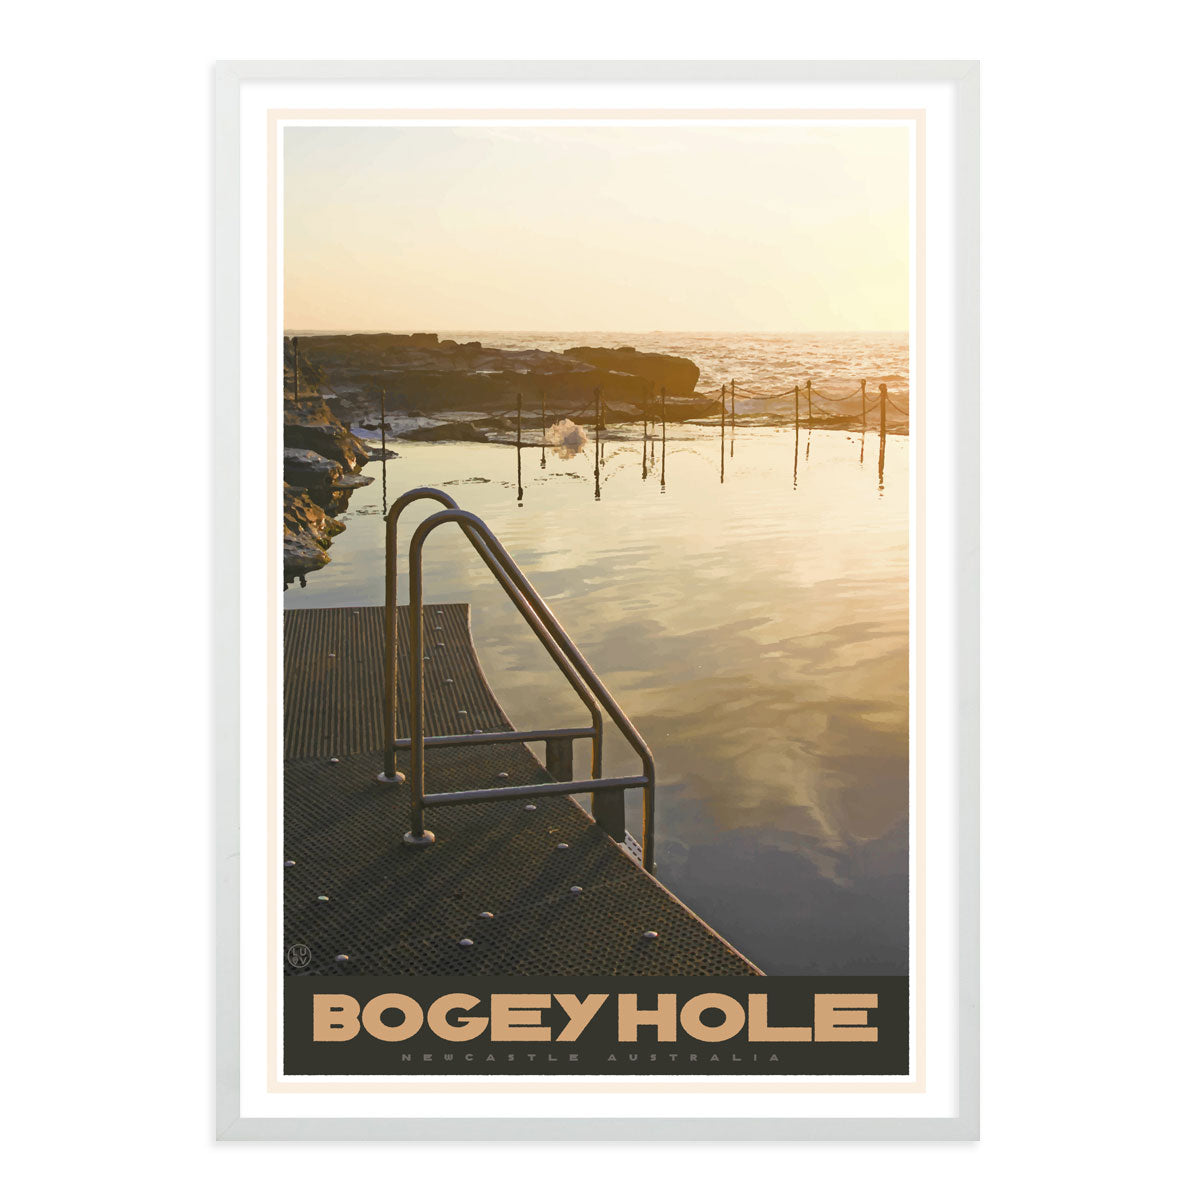 Newcastle Bogey Hole vintage travel style white framed print by places we luv